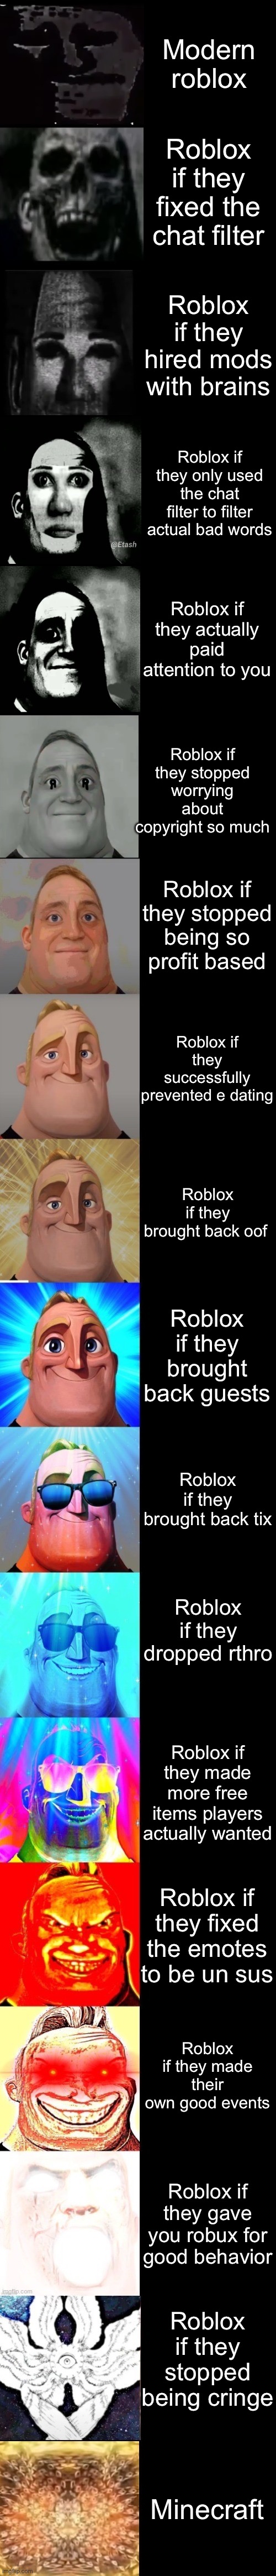 Mr Incredible from Trollge to God | Modern roblox; Roblox if they fixed the chat filter; Roblox if they hired mods with brains; Roblox if they only used the chat filter to filter actual bad words; Roblox if they actually paid attention to you; Roblox if they stopped worrying about copyright so much; Roblox if they stopped being so profit based; Roblox if they successfully prevented e dating; Roblox if they brought back oof; Roblox if they brought back guests; Roblox if they brought back tix; Roblox if they dropped rthro; Roblox if they made more free items players actually wanted; Roblox if they fixed the emotes to be un sus; Roblox if they made their own good events; Roblox if they gave you robux for good behavior; Roblox if they stopped being cringe; Minecraft | image tagged in mr incredible from trollge to god | made w/ Imgflip meme maker